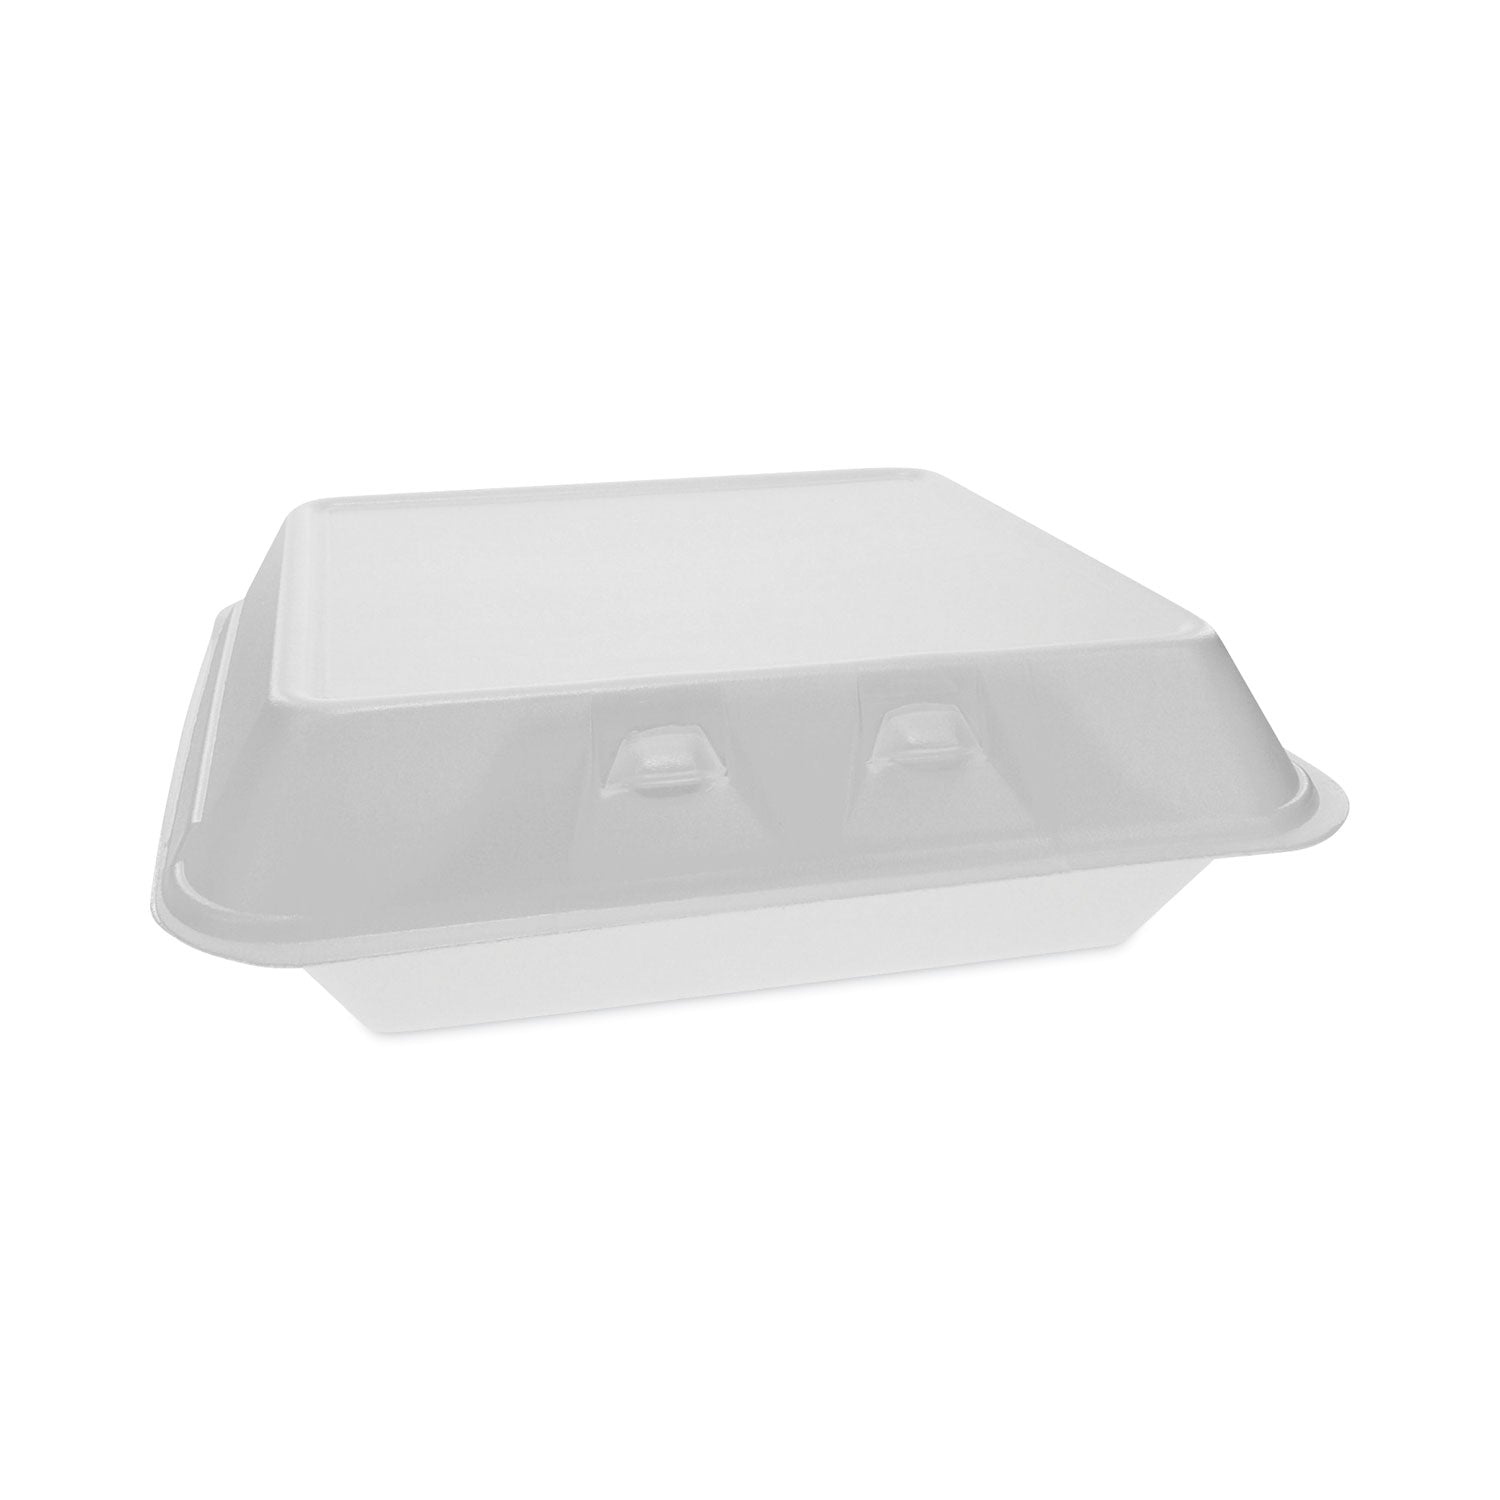 smartlock-foam-hinged-lid-container-x-large-95-x-105-x-325-white-250-carton_pctyhlw10010000 - 1